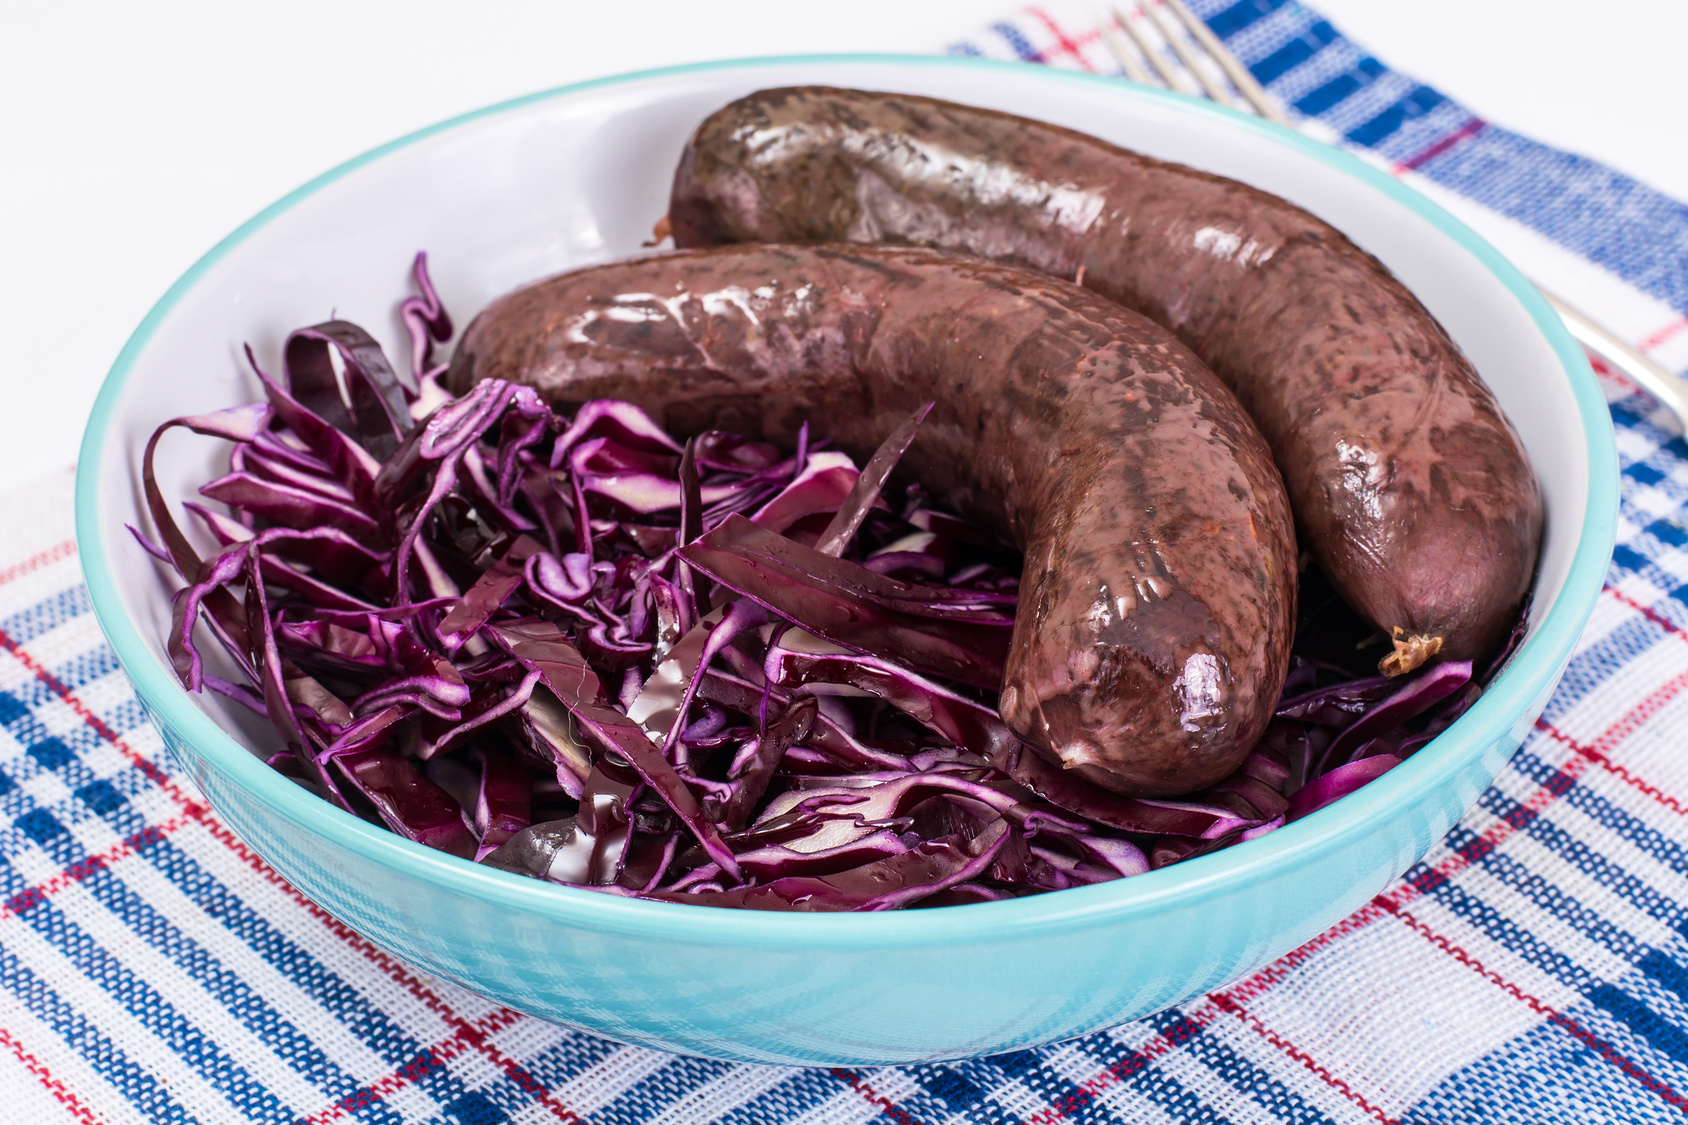 Homemade blood sausage with cabbage on a white background. Studio Photo